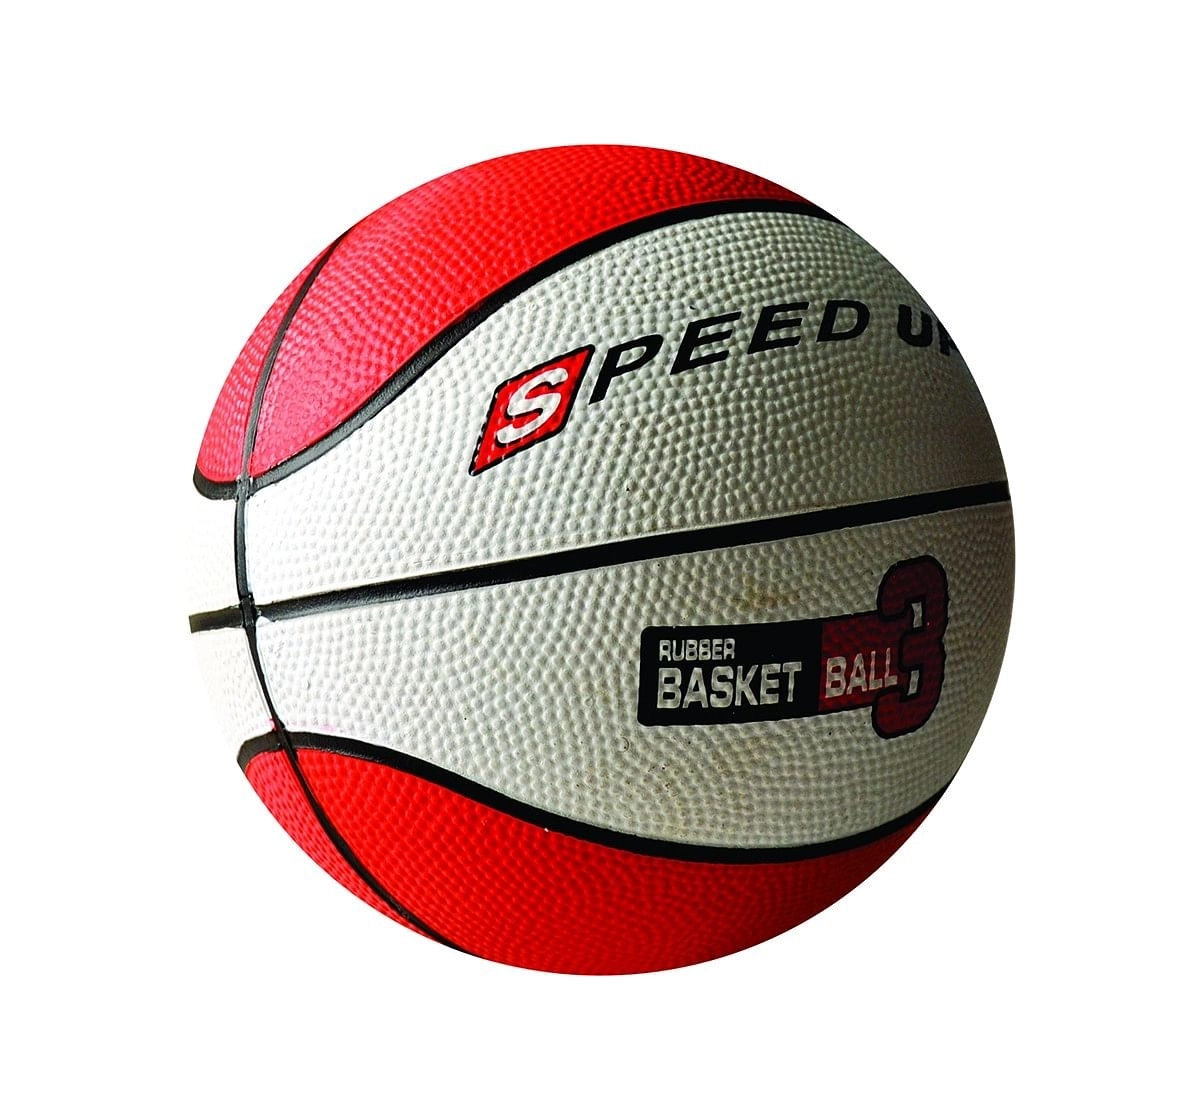 Speed Up Rubber Basketball Size 3 for Kids age 10Y+